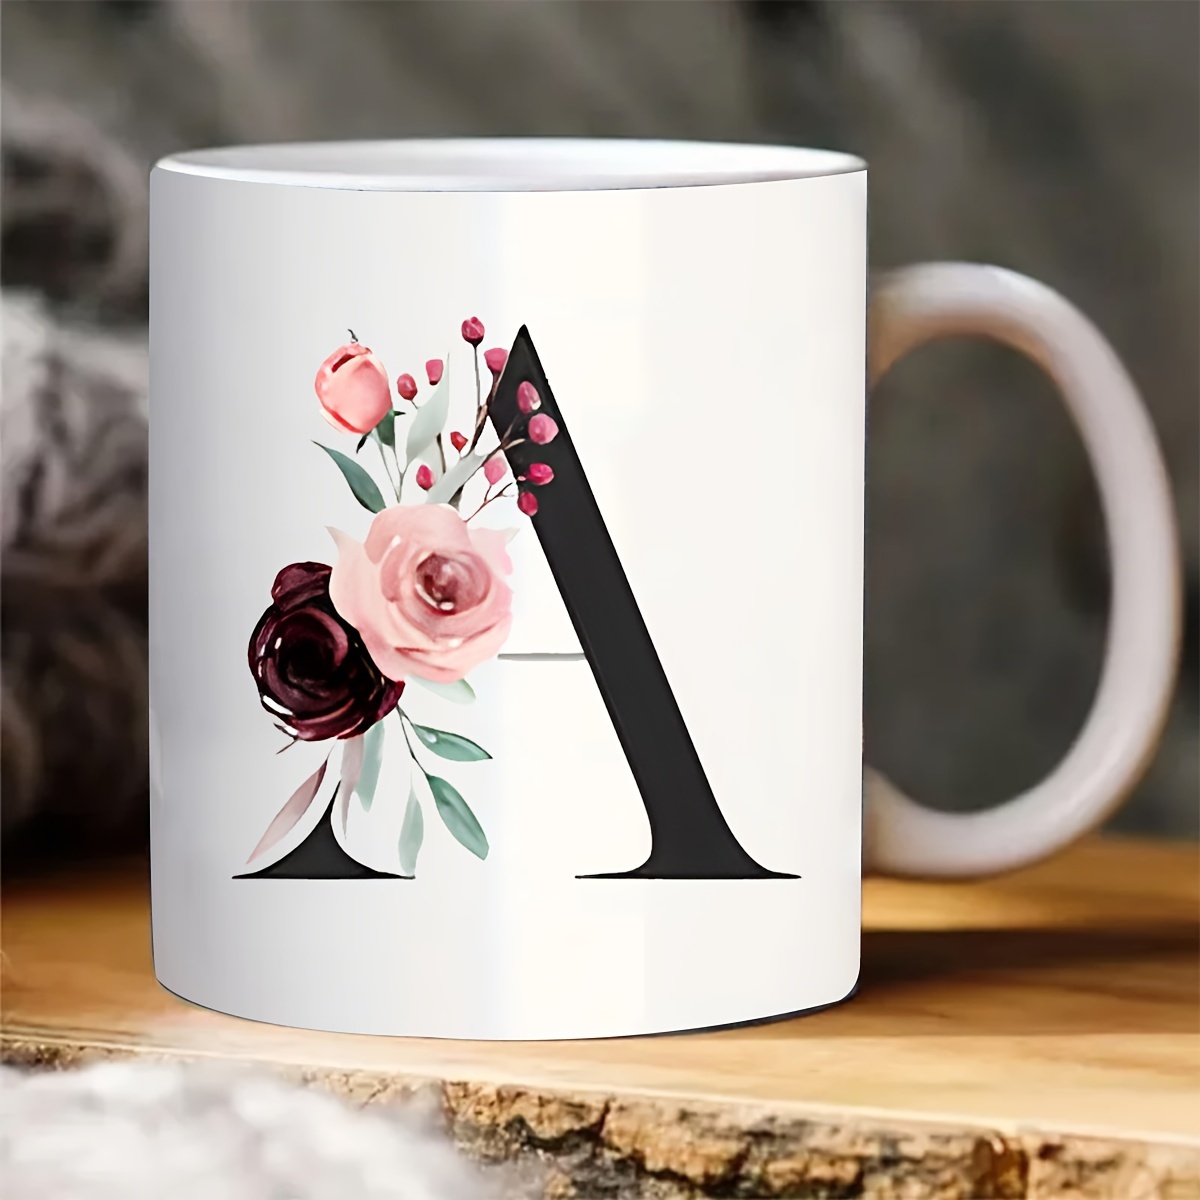  Initial Mug - Letter C Monogram - Cute Novelty Monogrammed  Coffee Cup - Perfect Personalized Bridal Shower Or Wedding Gift For Women  And Men - Unique Name Gift Idea For Tea